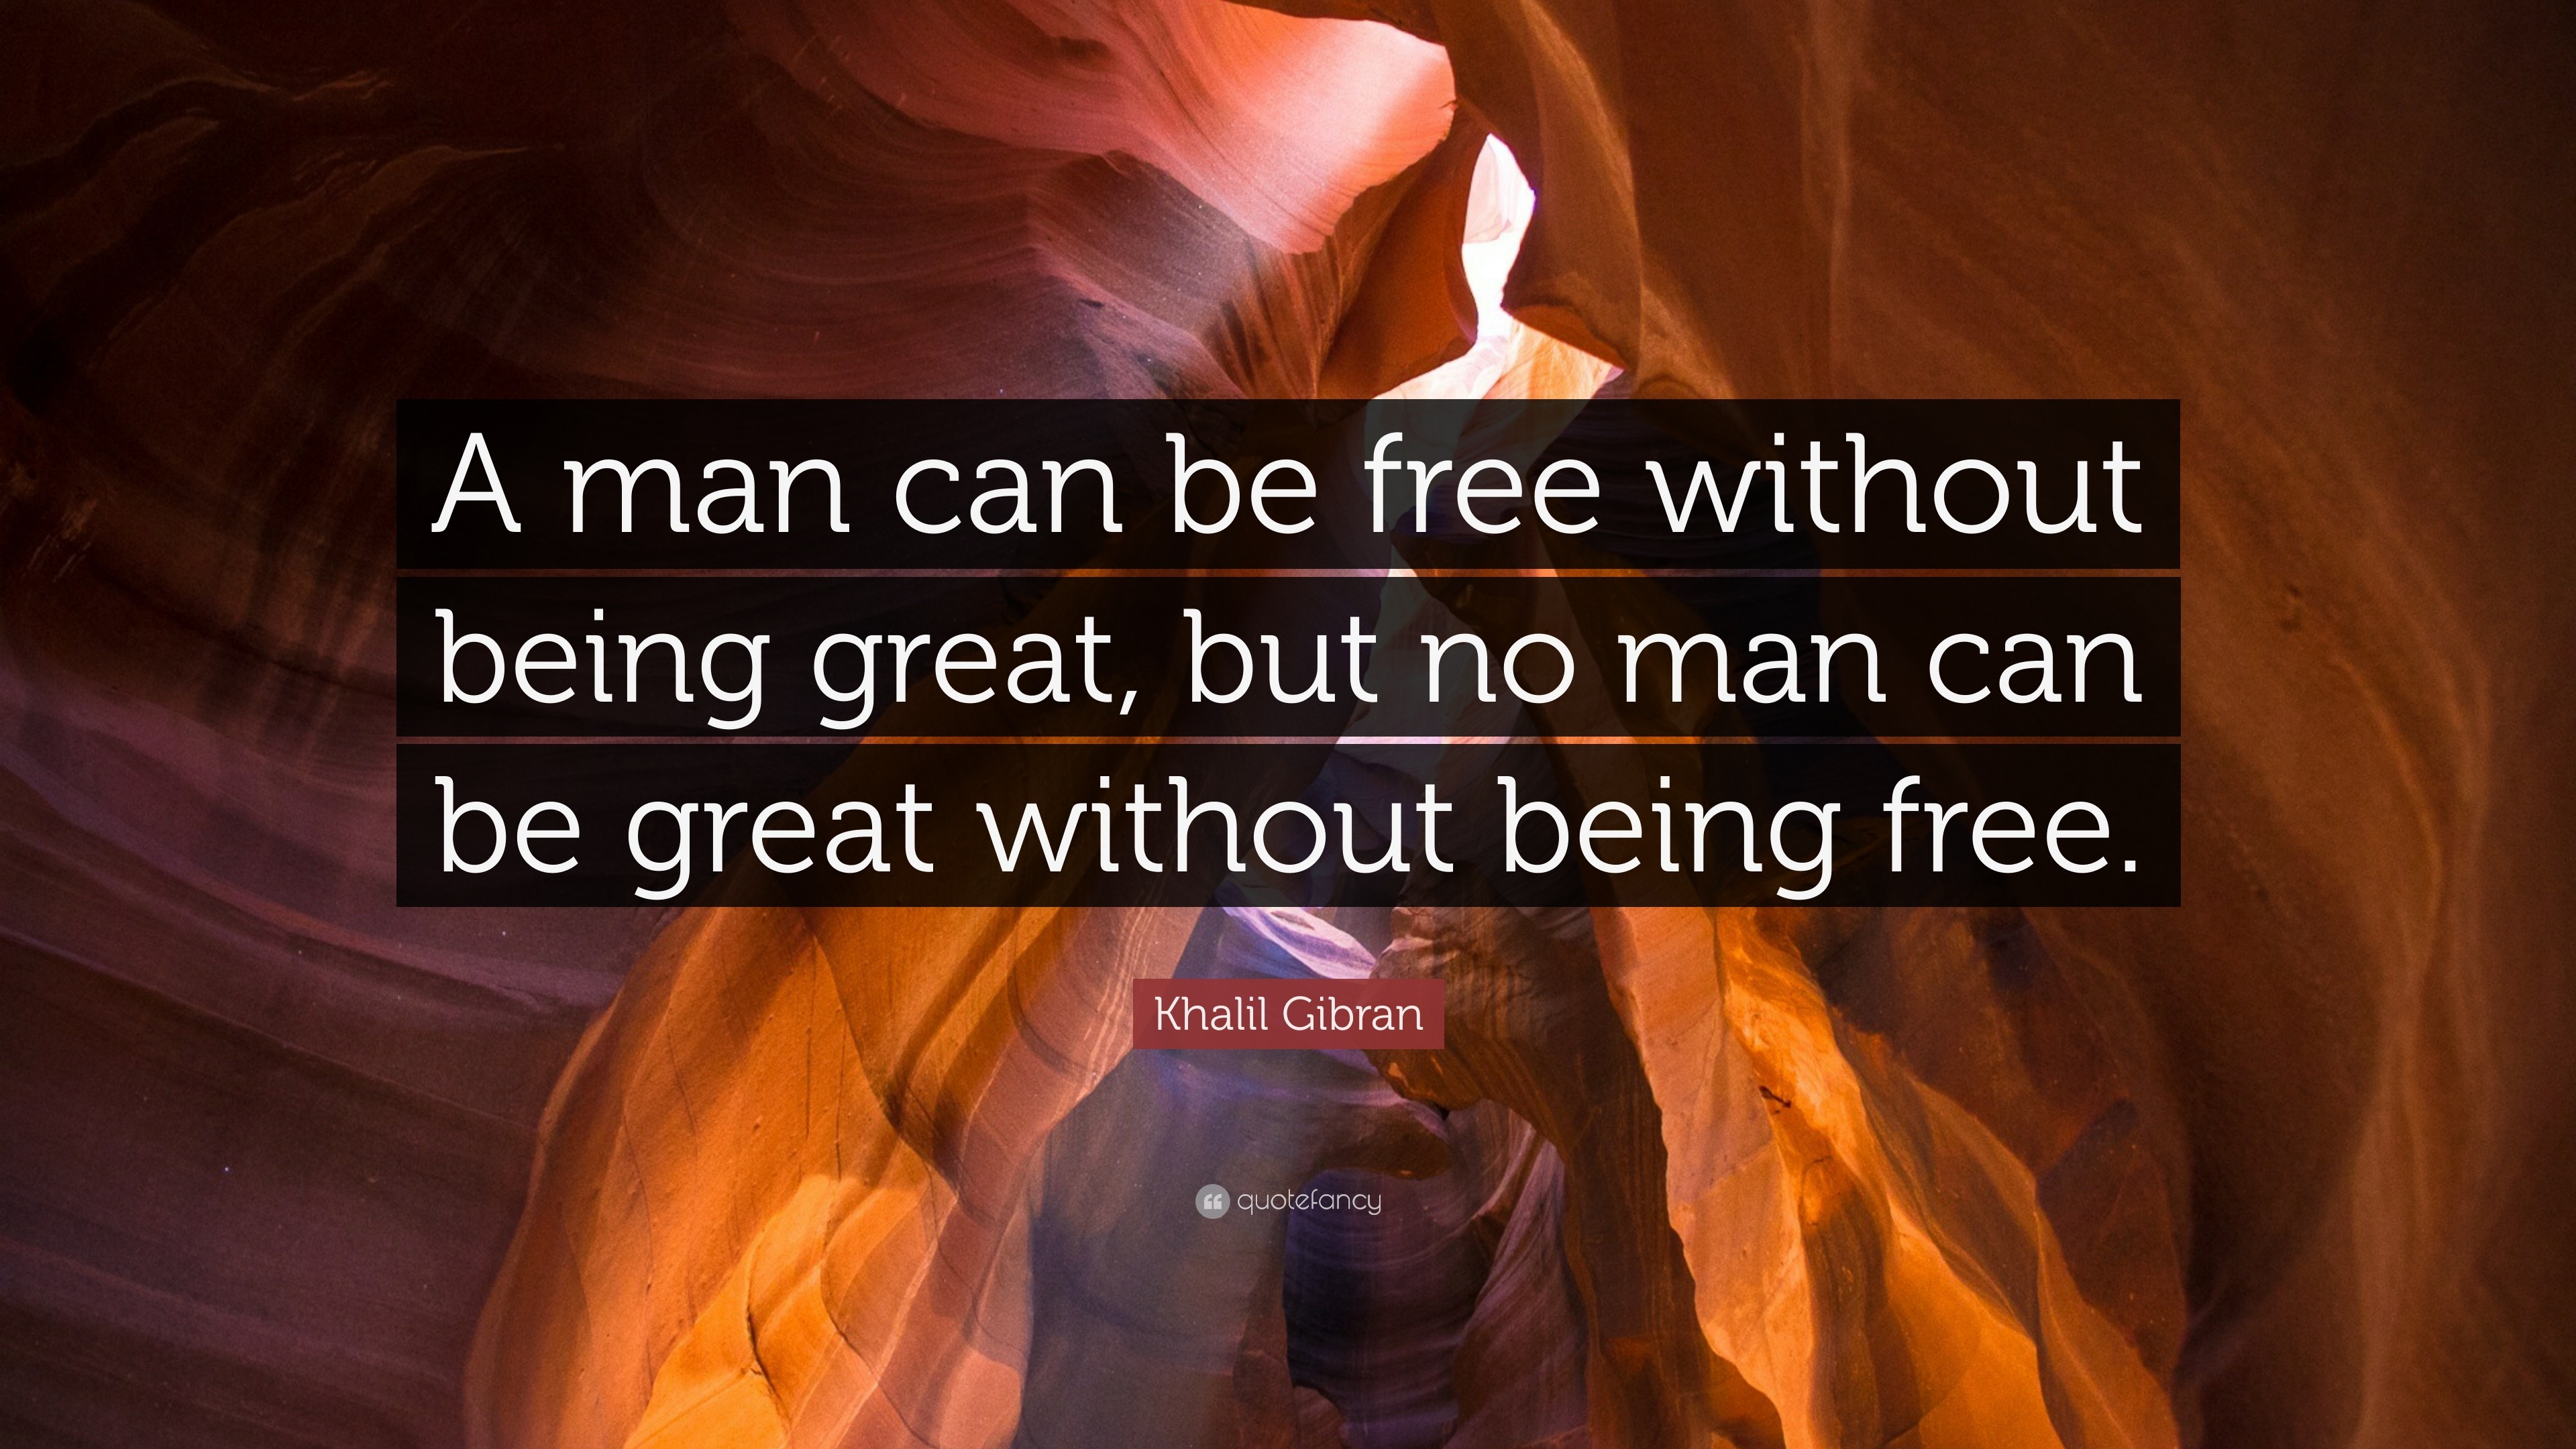 Khalil Gibran Quote: “A man can be free without being great, but no man ...